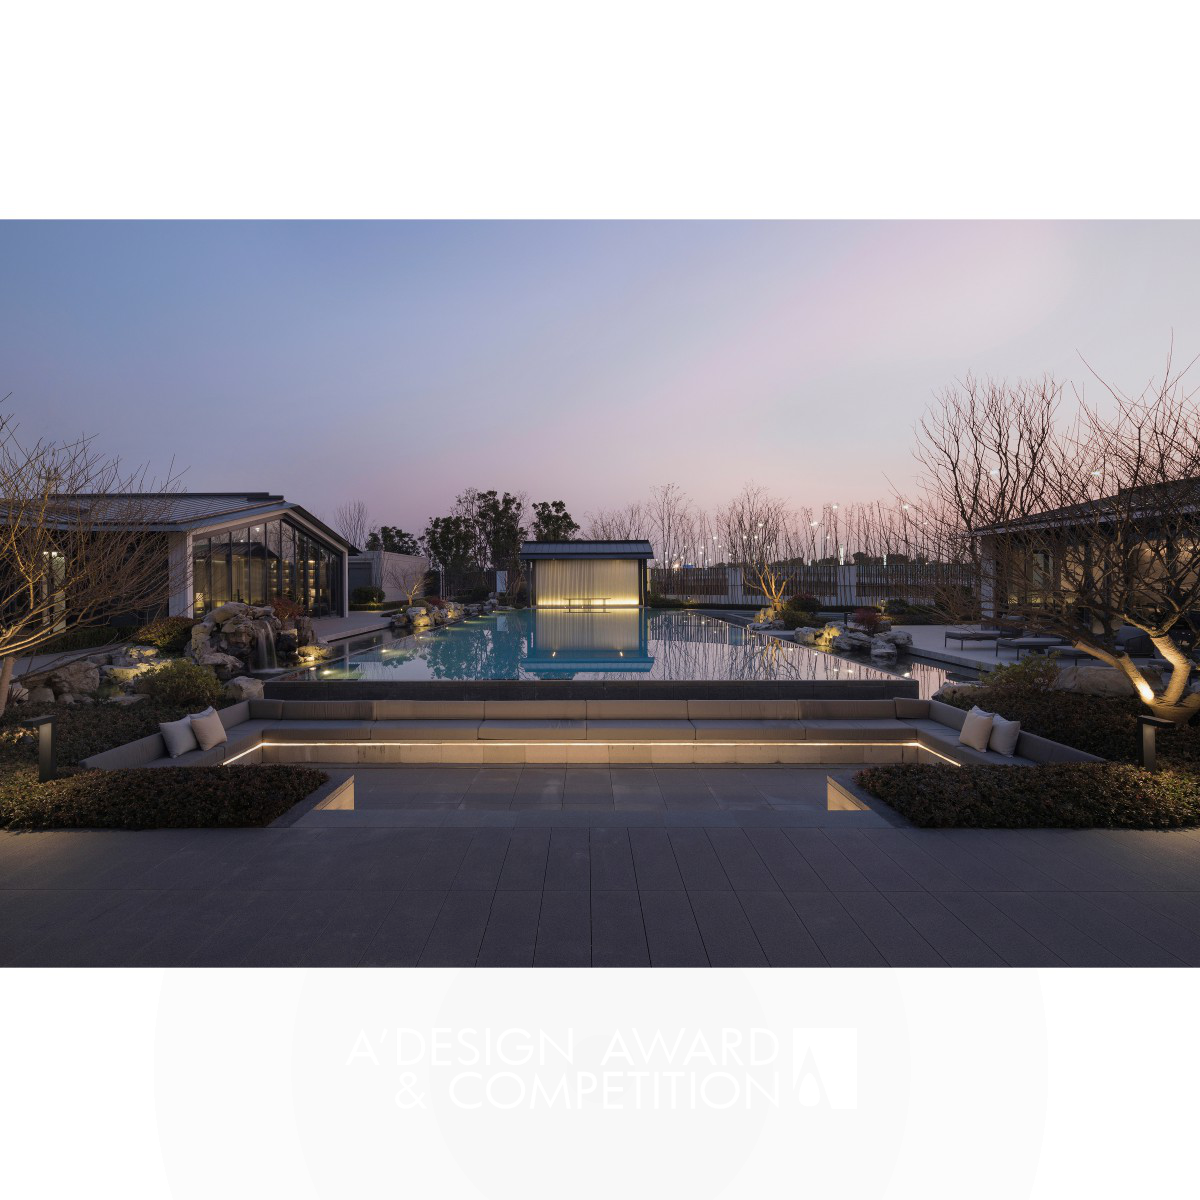 Hangzhou Gescape Design Co., Ltd wins Silver at the prestigious A' Landscape Planning and Garden Design Award with Willow Shores Demonstration Area.